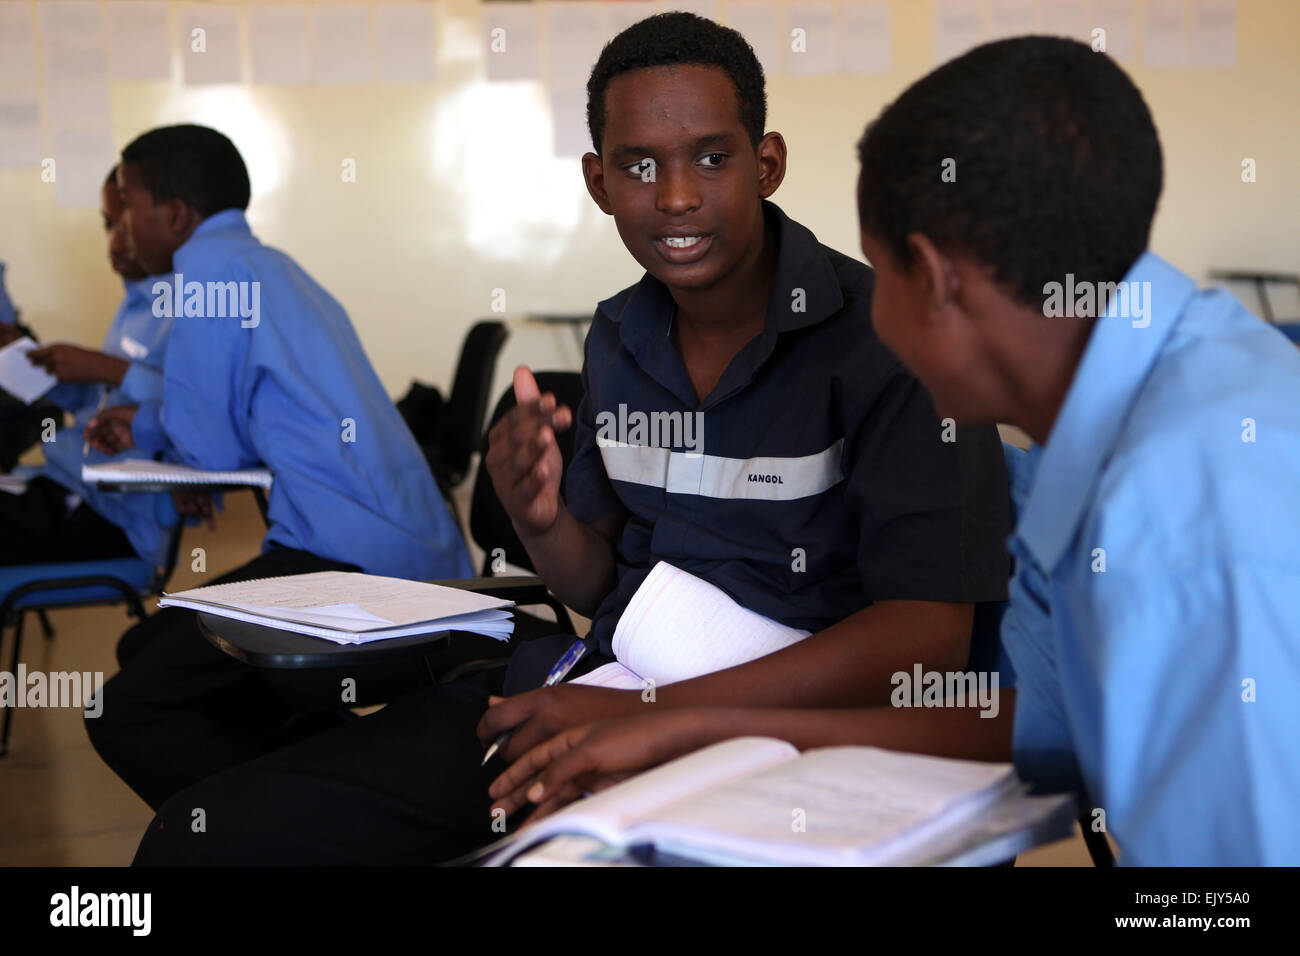 College-Studenten am Abaarso School of Technology and Science, Somaliland. Stockfoto